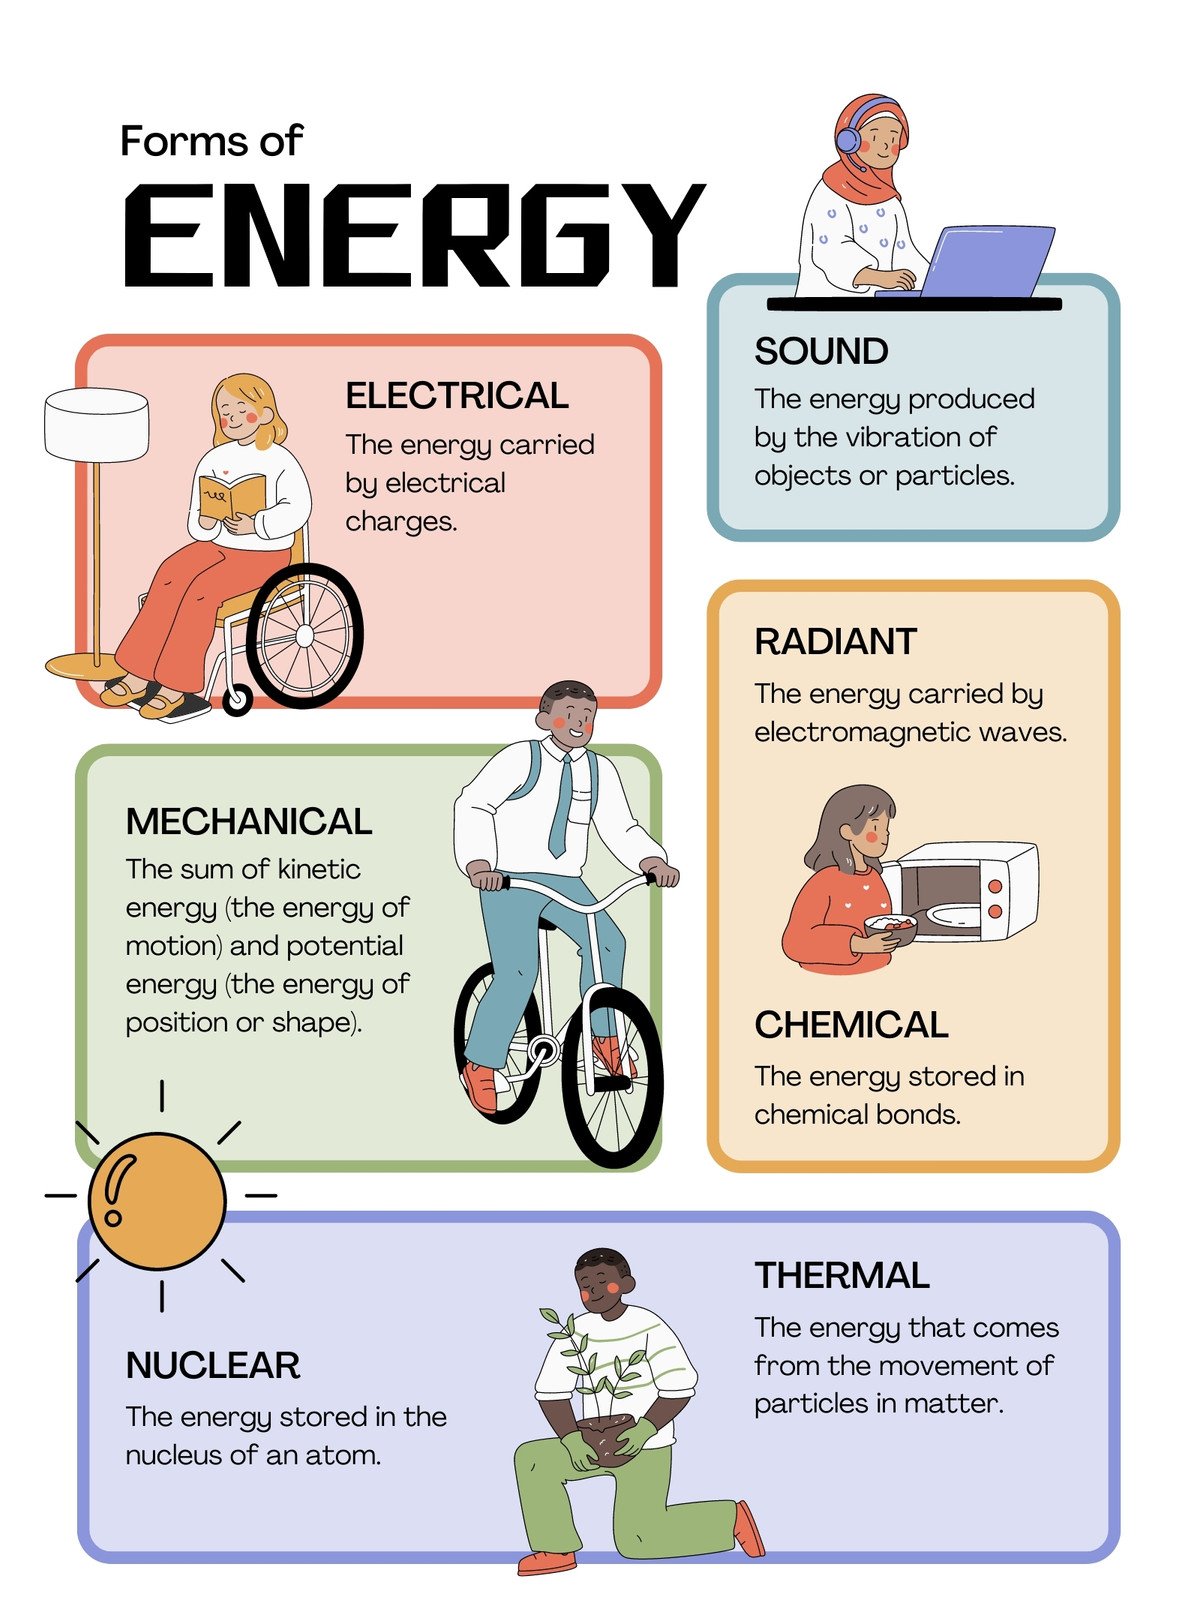 science posters for classrooms